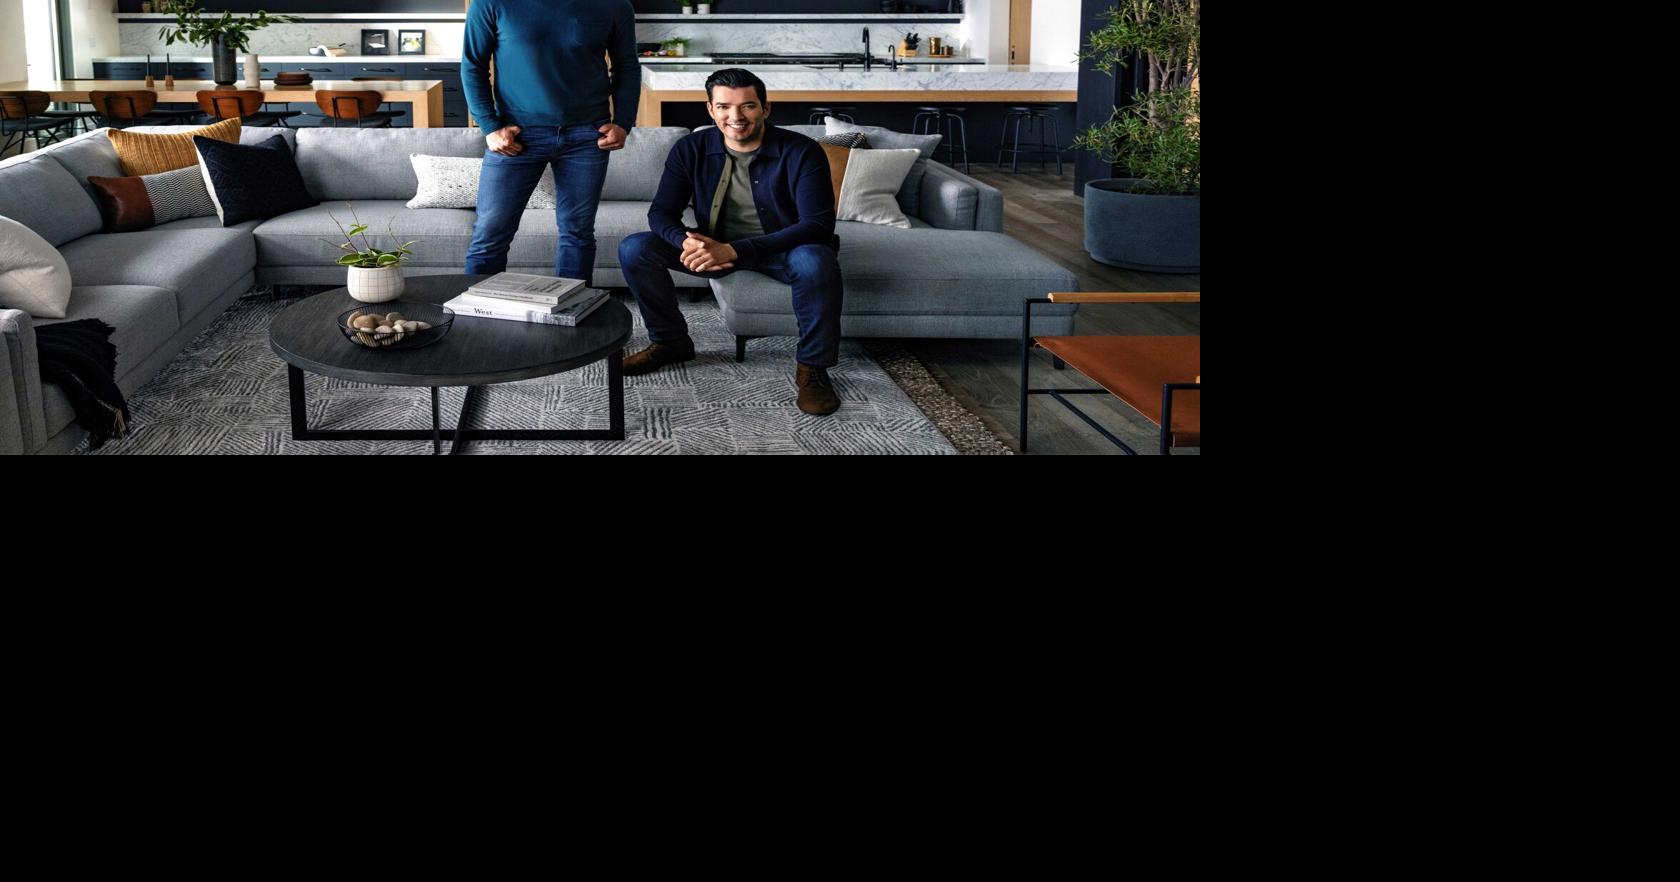 At Home: New furniture line from HGTV’s ‘Property Brothers’ reveals the twins’ differences | Lifestyle